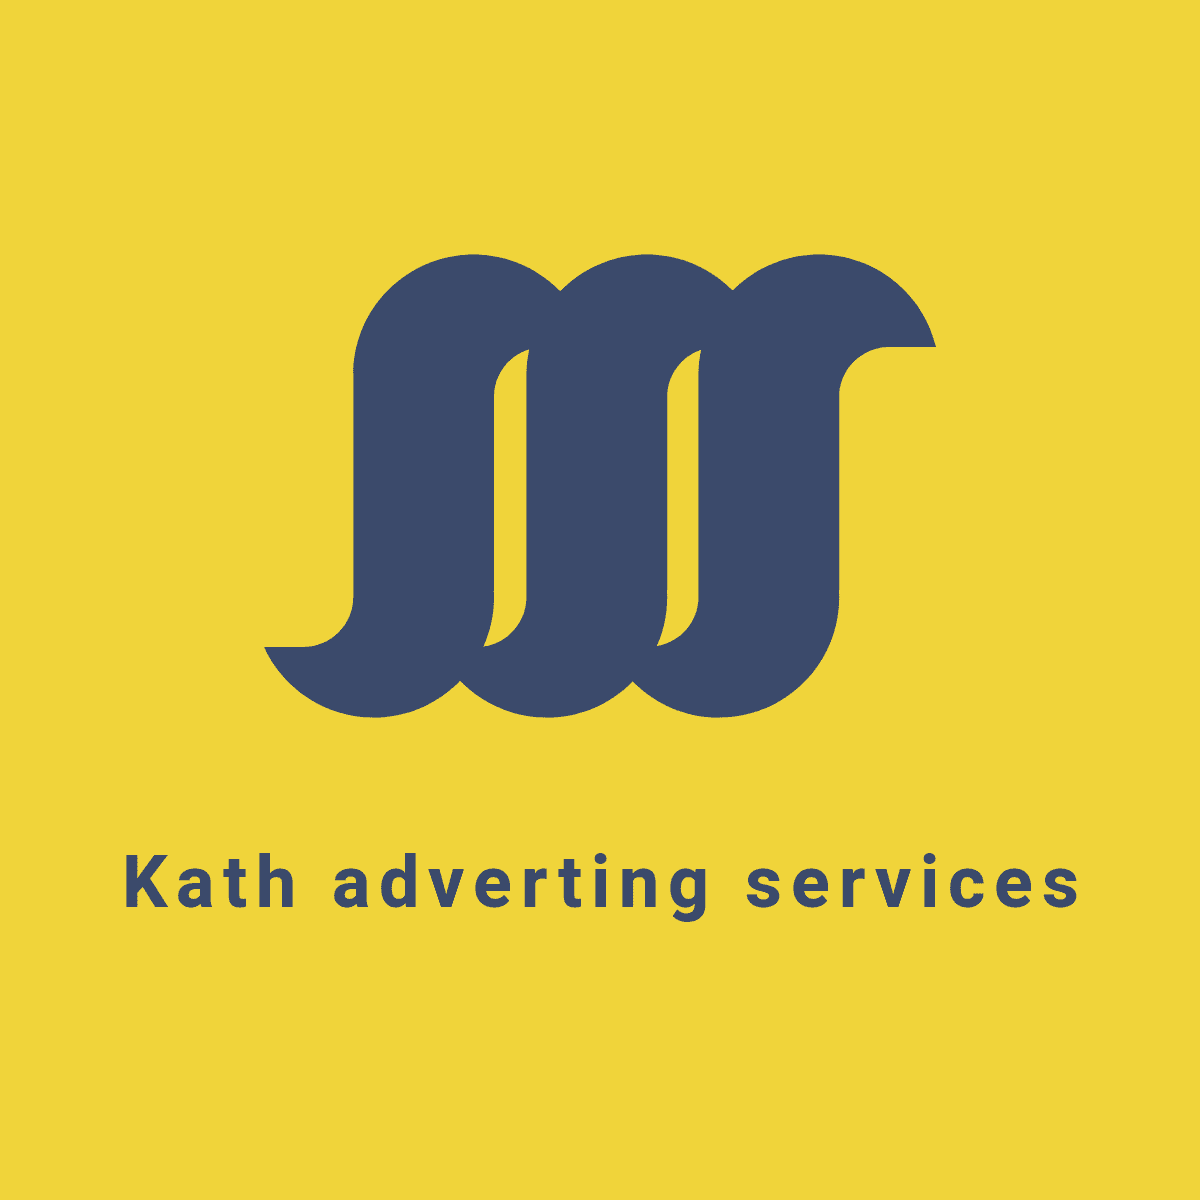 Kath adverting services